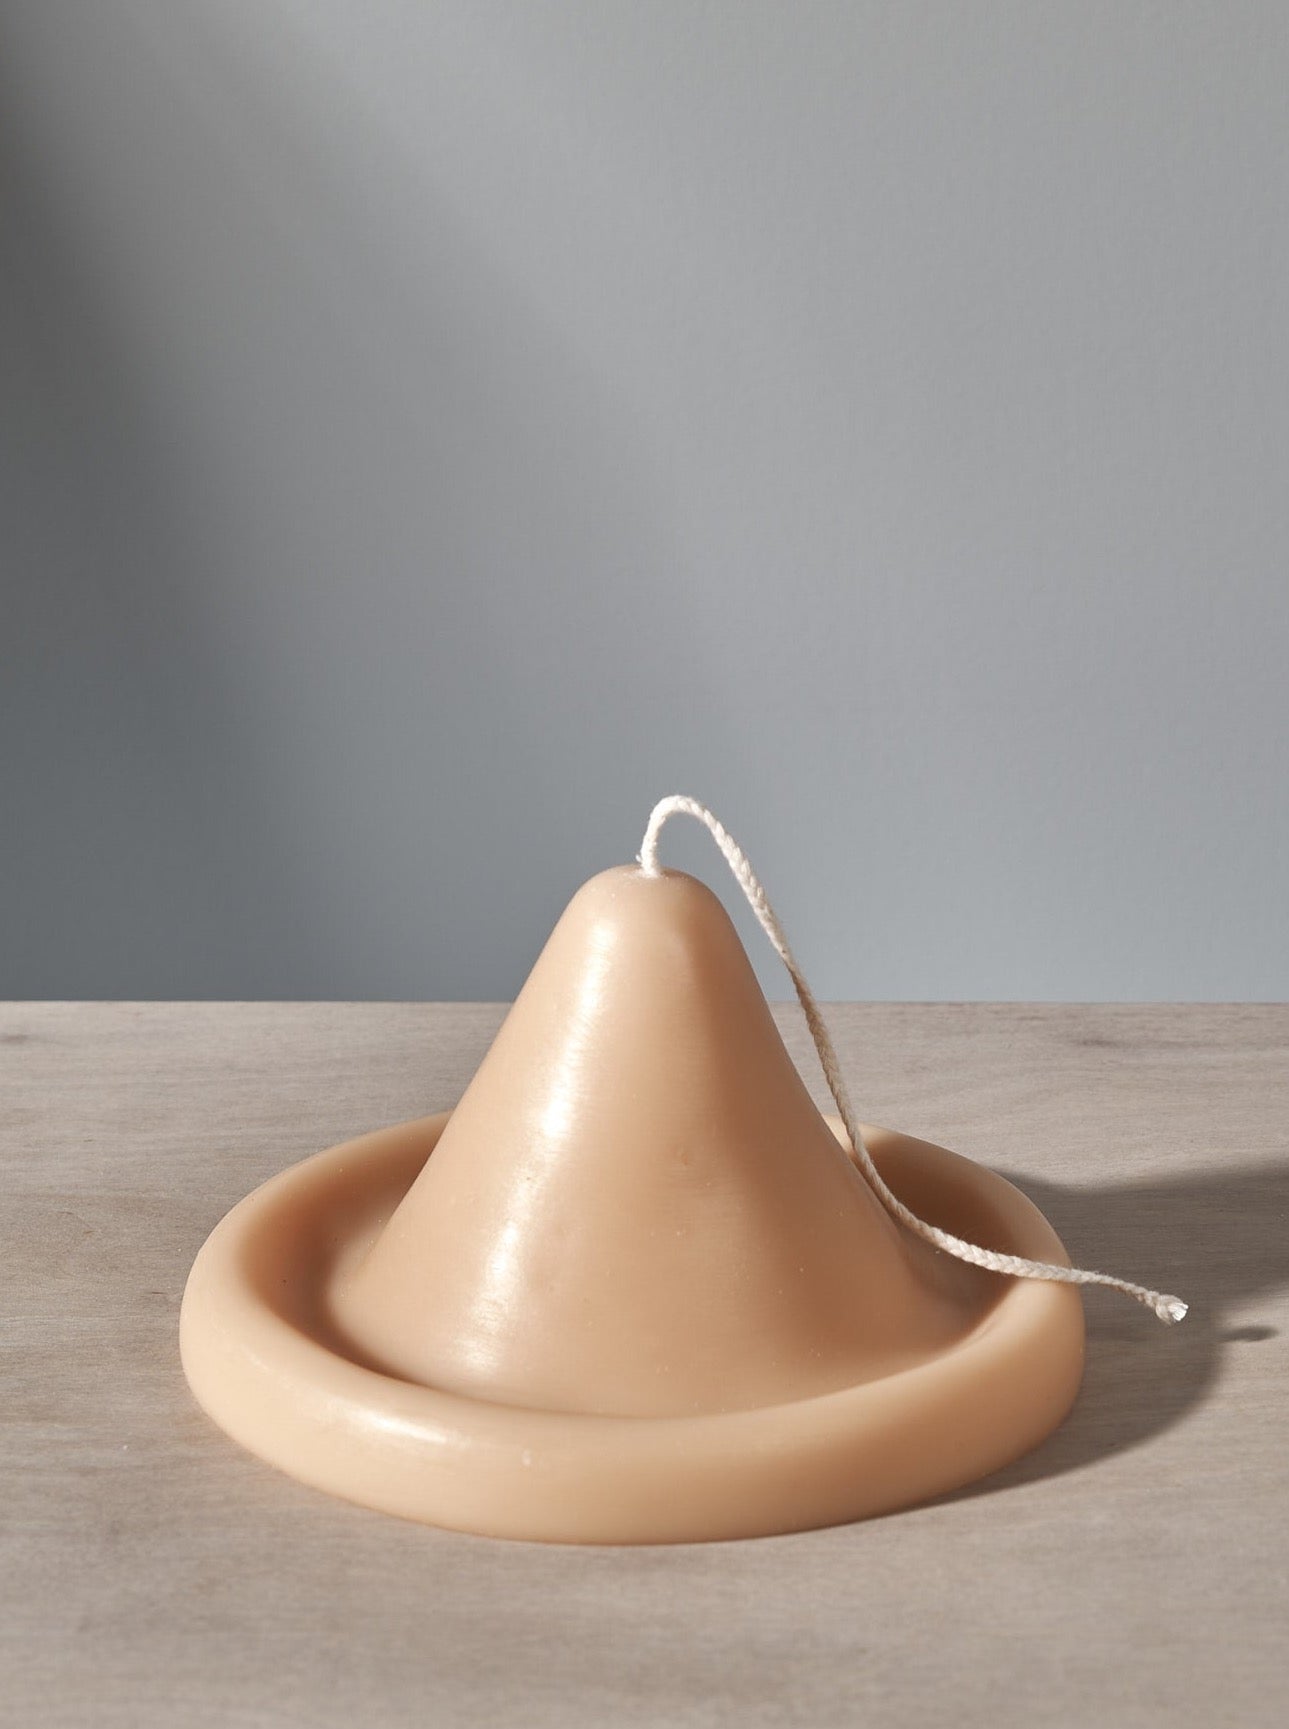 An Onno Candle shaped like a hat sitting on a table.